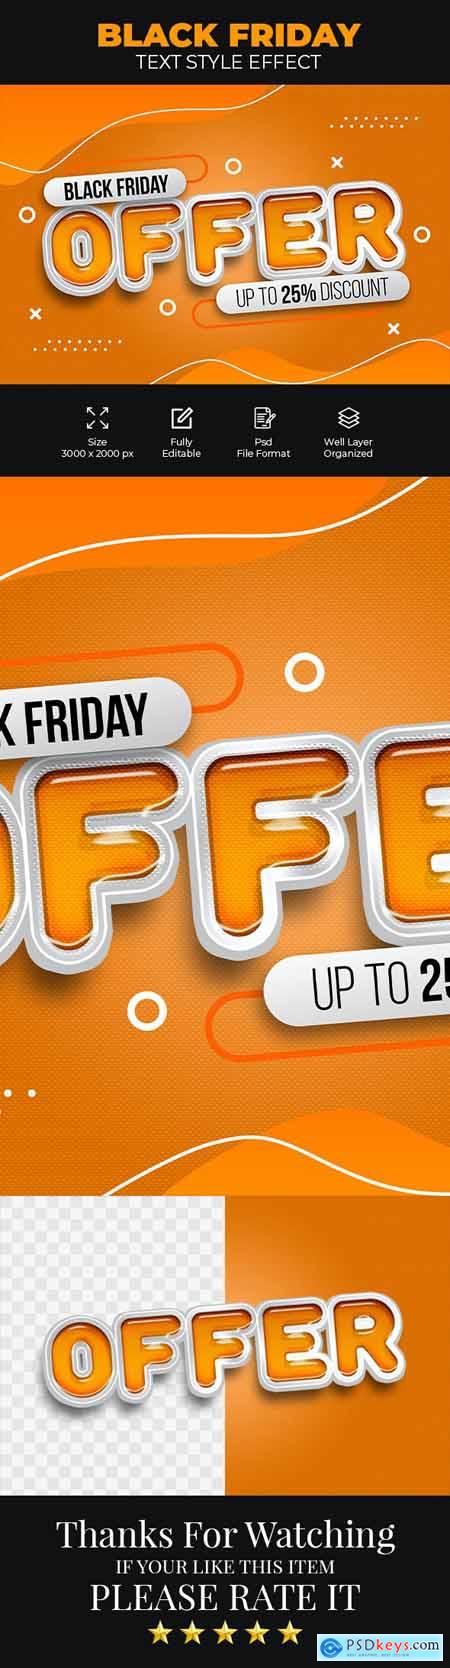 Black Friday Offer Psd Text Style Effect 28586993